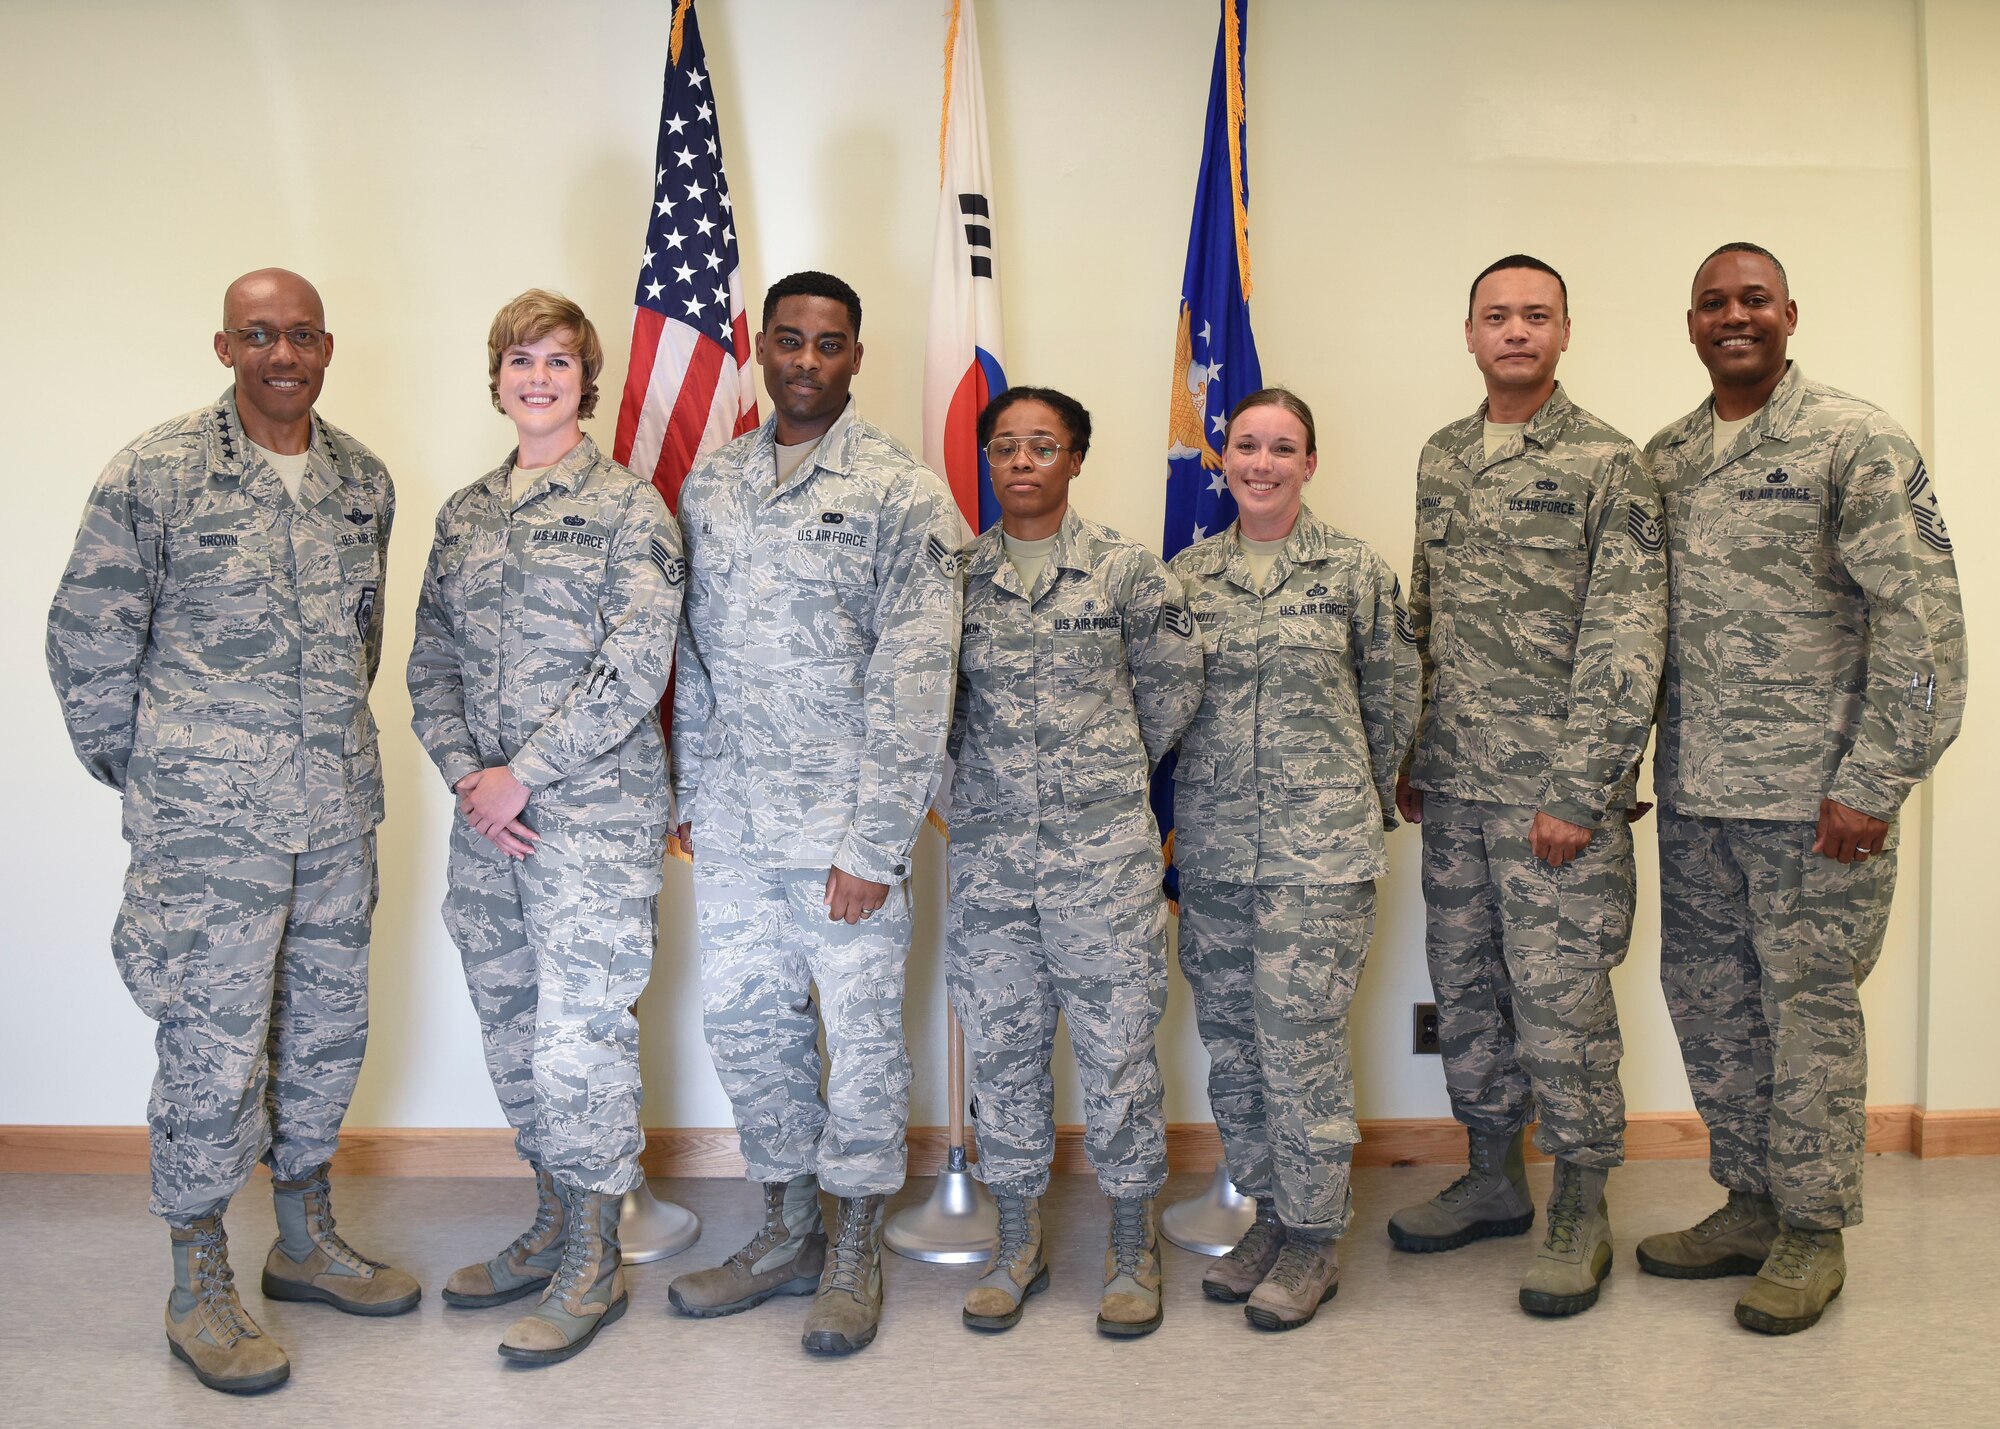 U.S. Air Force Gen. CQ Brown, Jr., Pacific Air Forces commander (left), and Chief Master Sgt. Anthony Johnson, PACAF command chief (far right), pose with 8th Fighter Wing Airmen during an immersion at Kunsan Air Base, Republic of Korea, Aug. 29, 2018. During his visit, Brown recognized these Airmen for their hard work and outstanding performance within their squadrons. (U.S. Air Force photo by Senior Airman Savannah L. Waters)